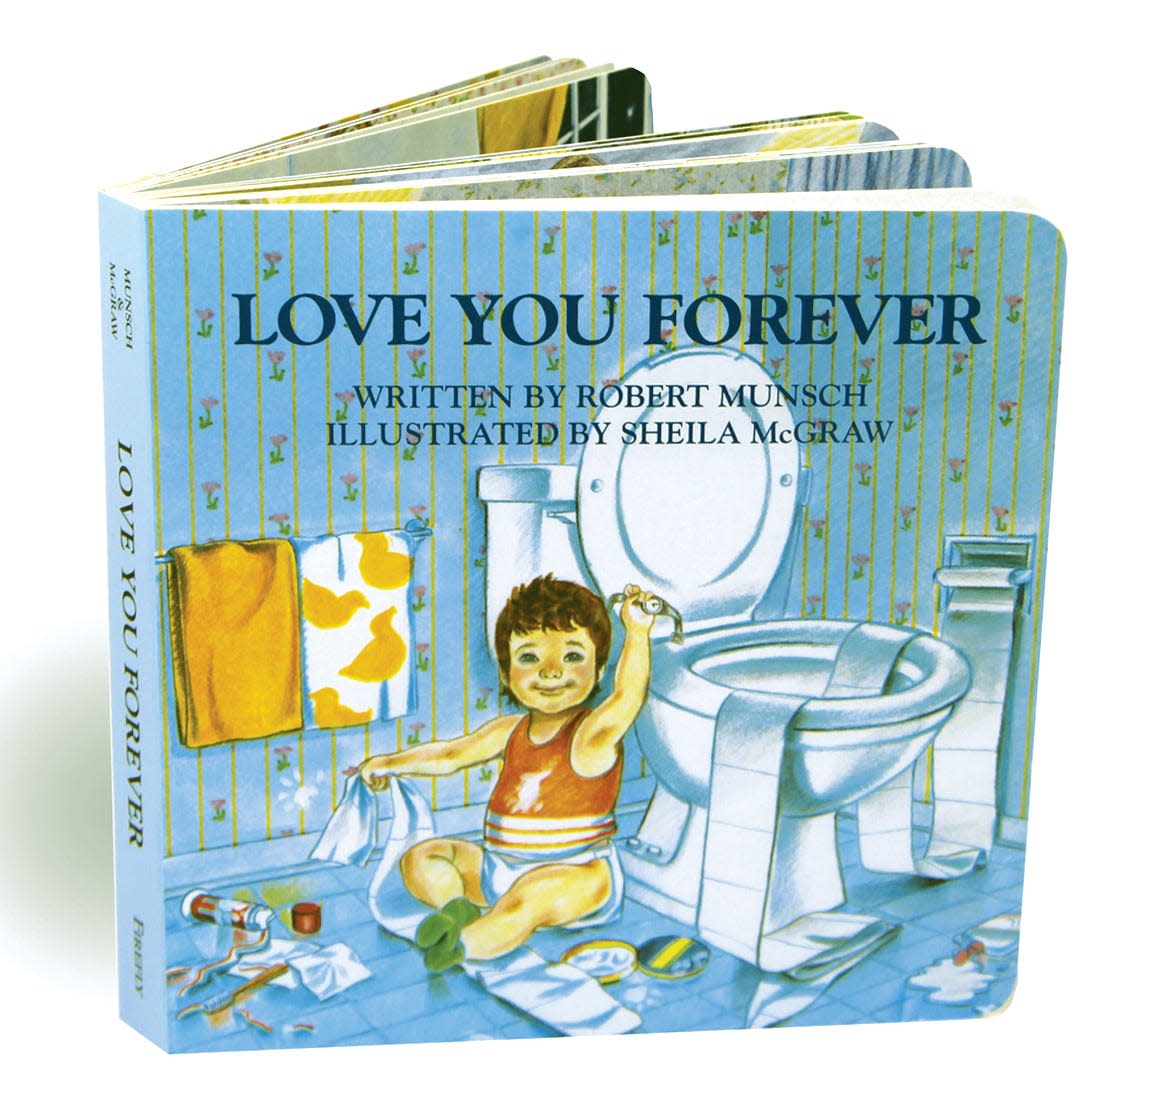 Book cover jacket image for “Love you forever” by Robert Munsch